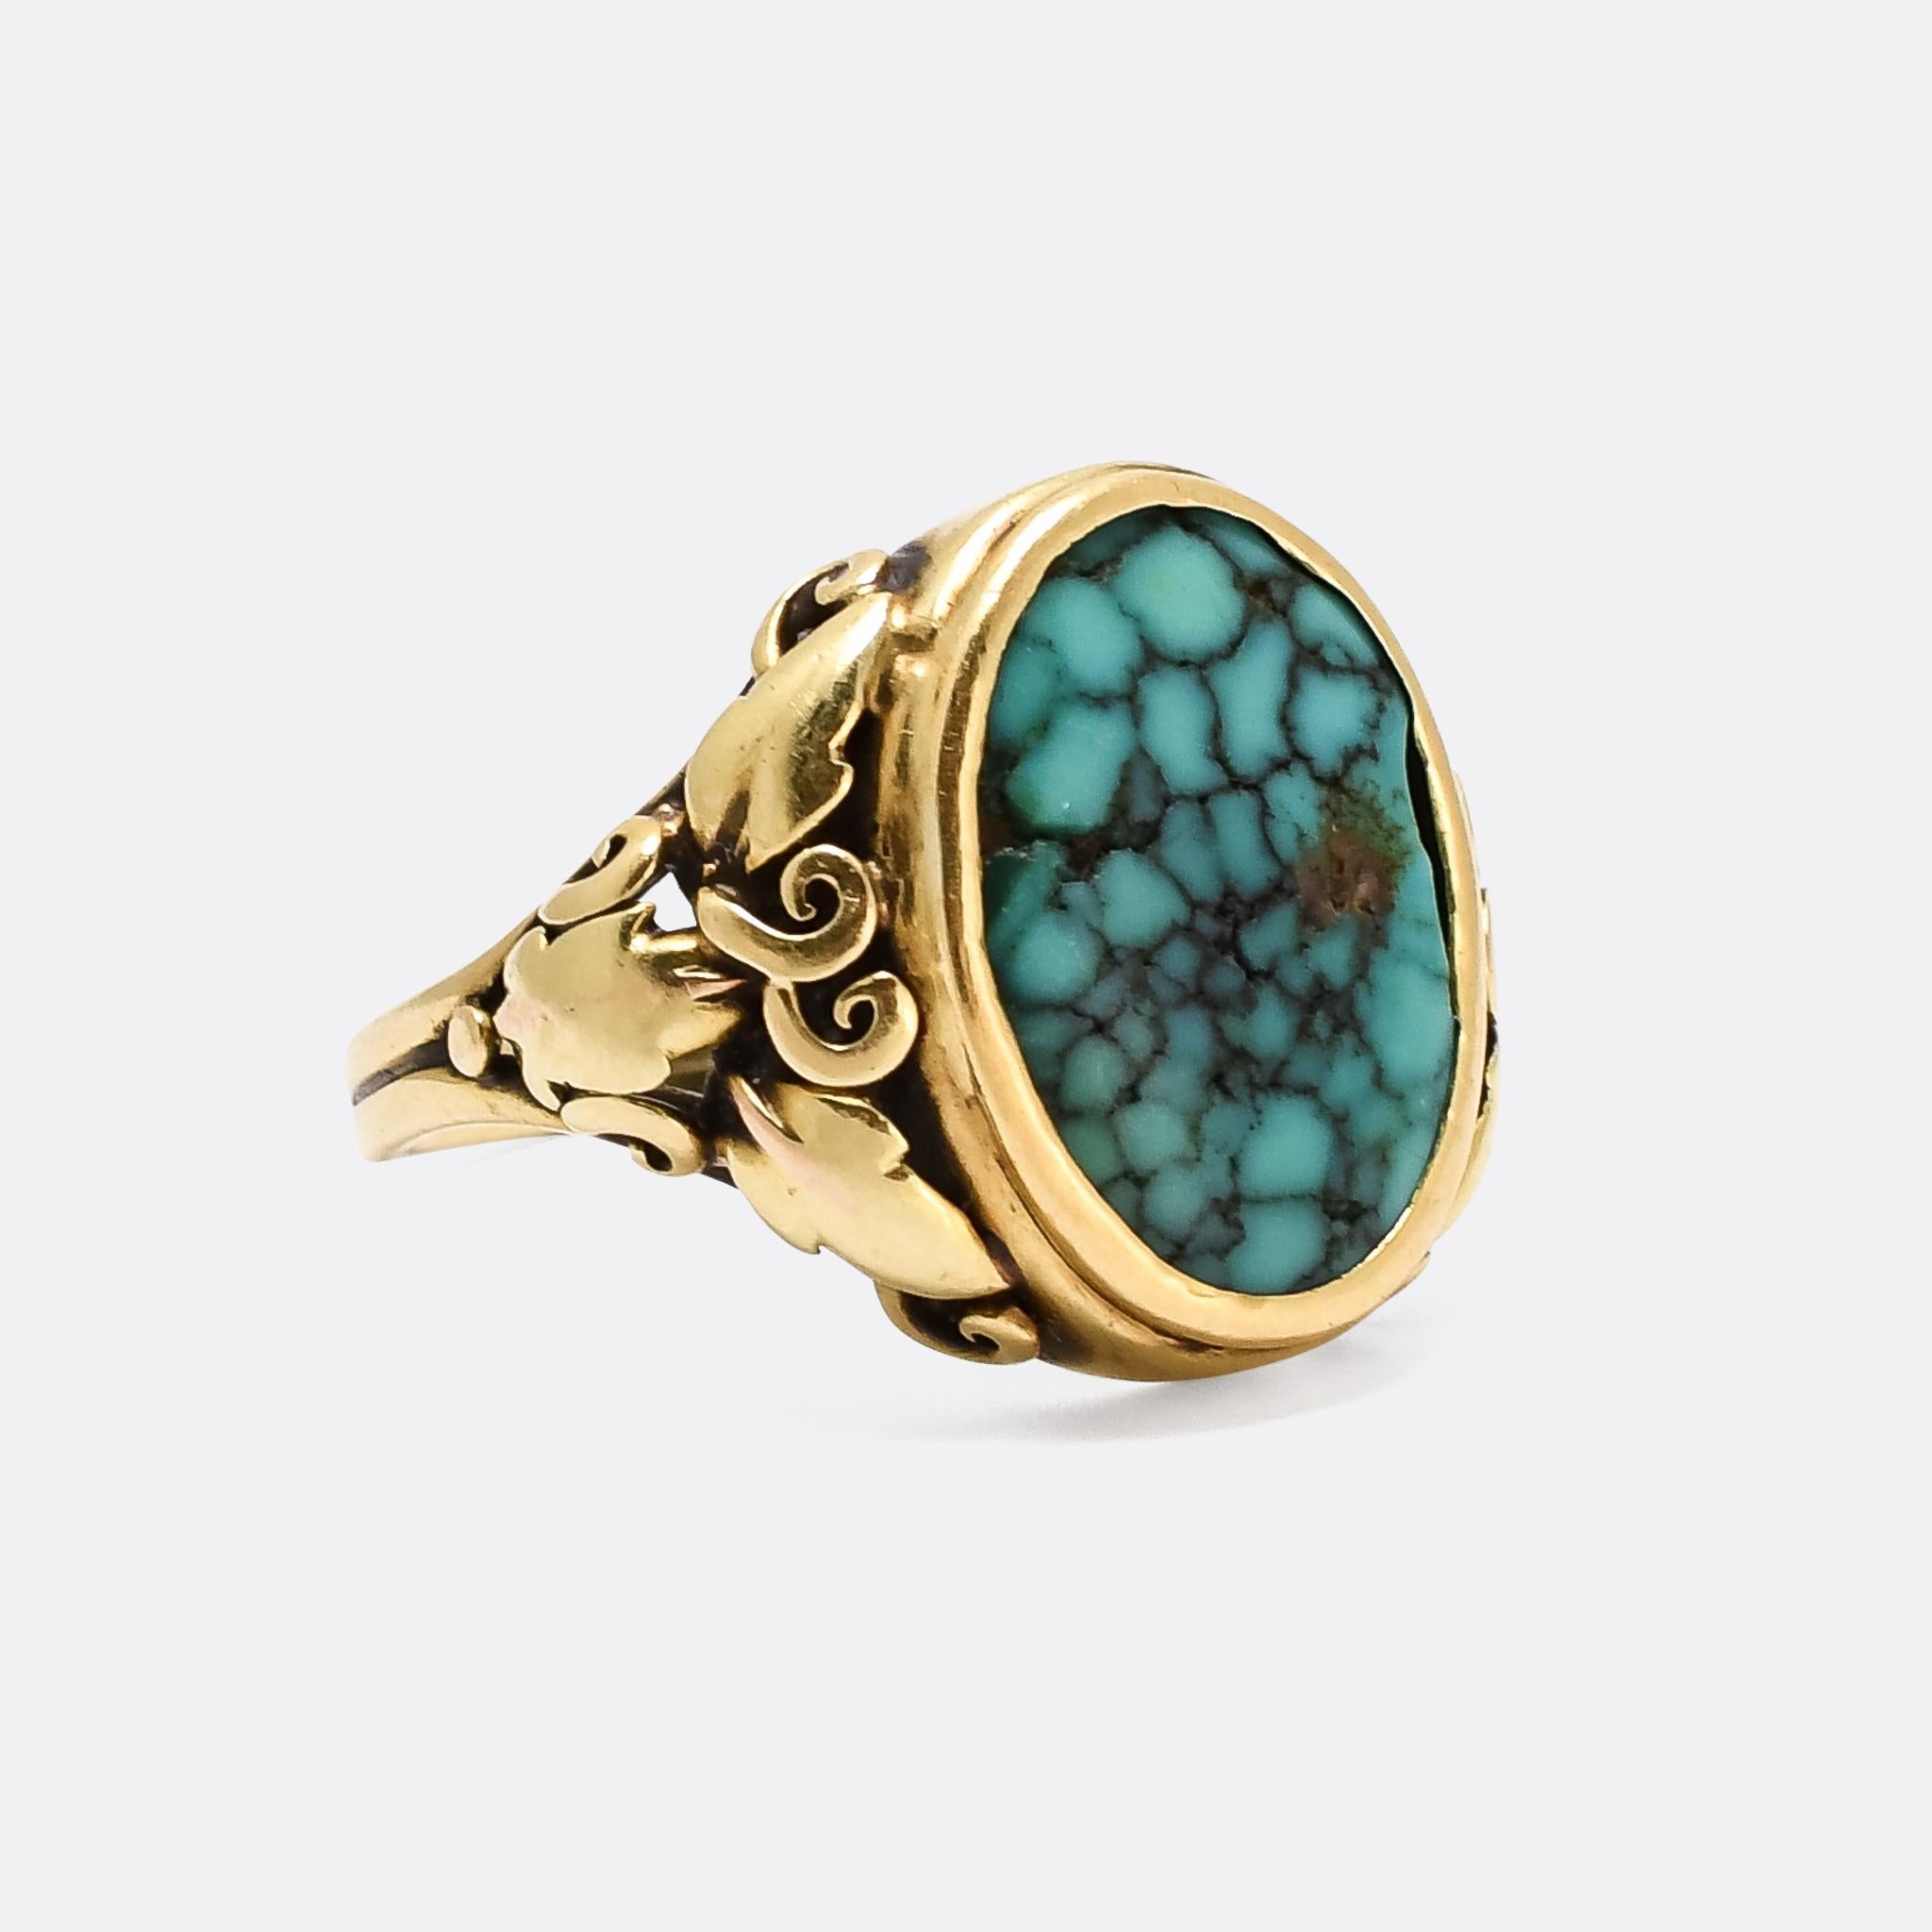 A fantastic early Arts & Crafts signet ring dating from the latter half of the 19th century, circa 1880. It's set with a beautiful oval turquoise matrix, cut as a shallow cabochon, with wonderfully intricate grape vine and leaf shoulder detailing.